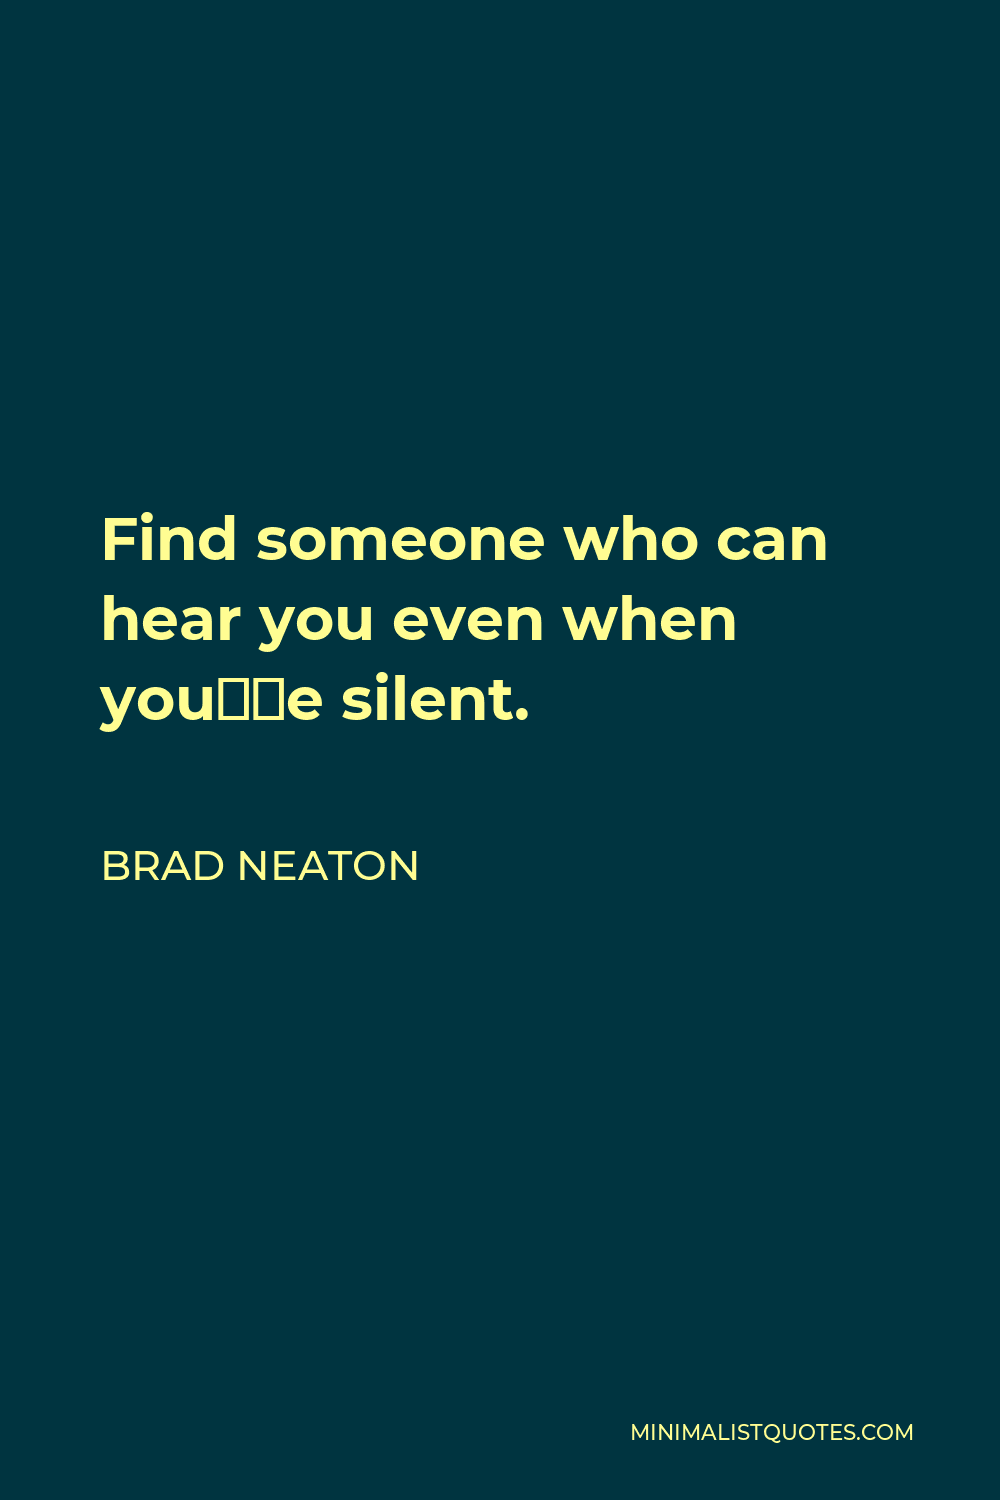 Brad Neaton Quote - Find someone who can hear you even when you’re silent.